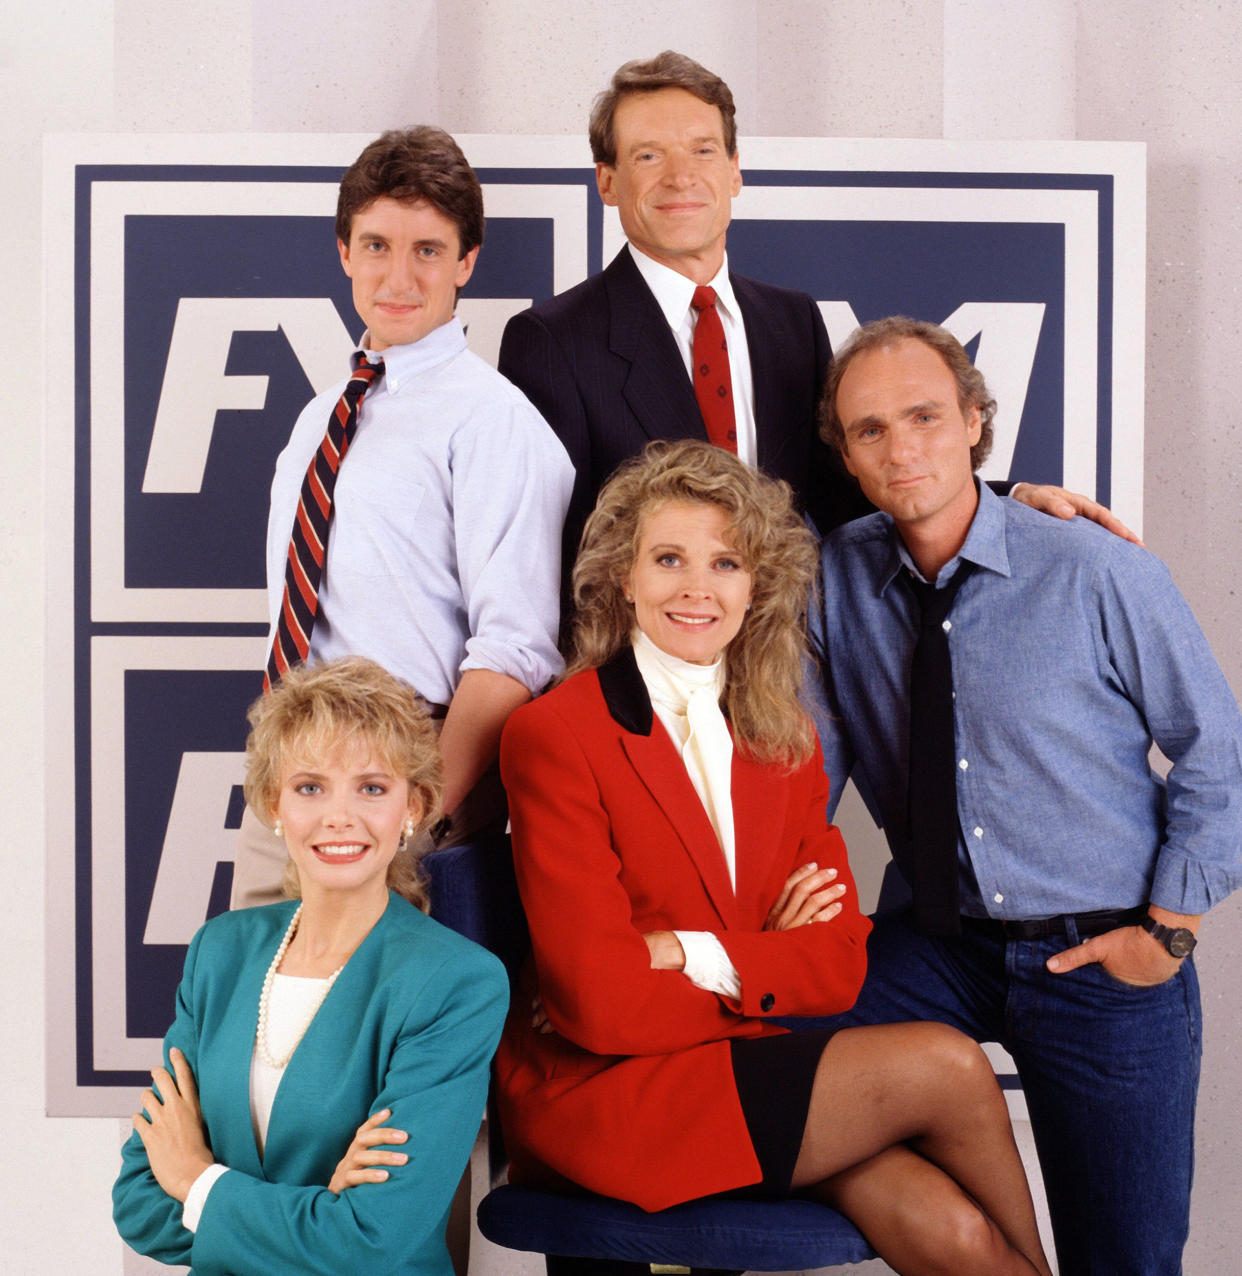 Charles Kimbrough as Jim Dial, Joe Regalbuto as Frank Fontana, Candice Bergen as Murphy Brown, Faith Ford as Corky Sherwood and Grant Shaud as Miles Silverberg.  Image dated August 2, 1988. (CBS Photo Archive / Getty Images)